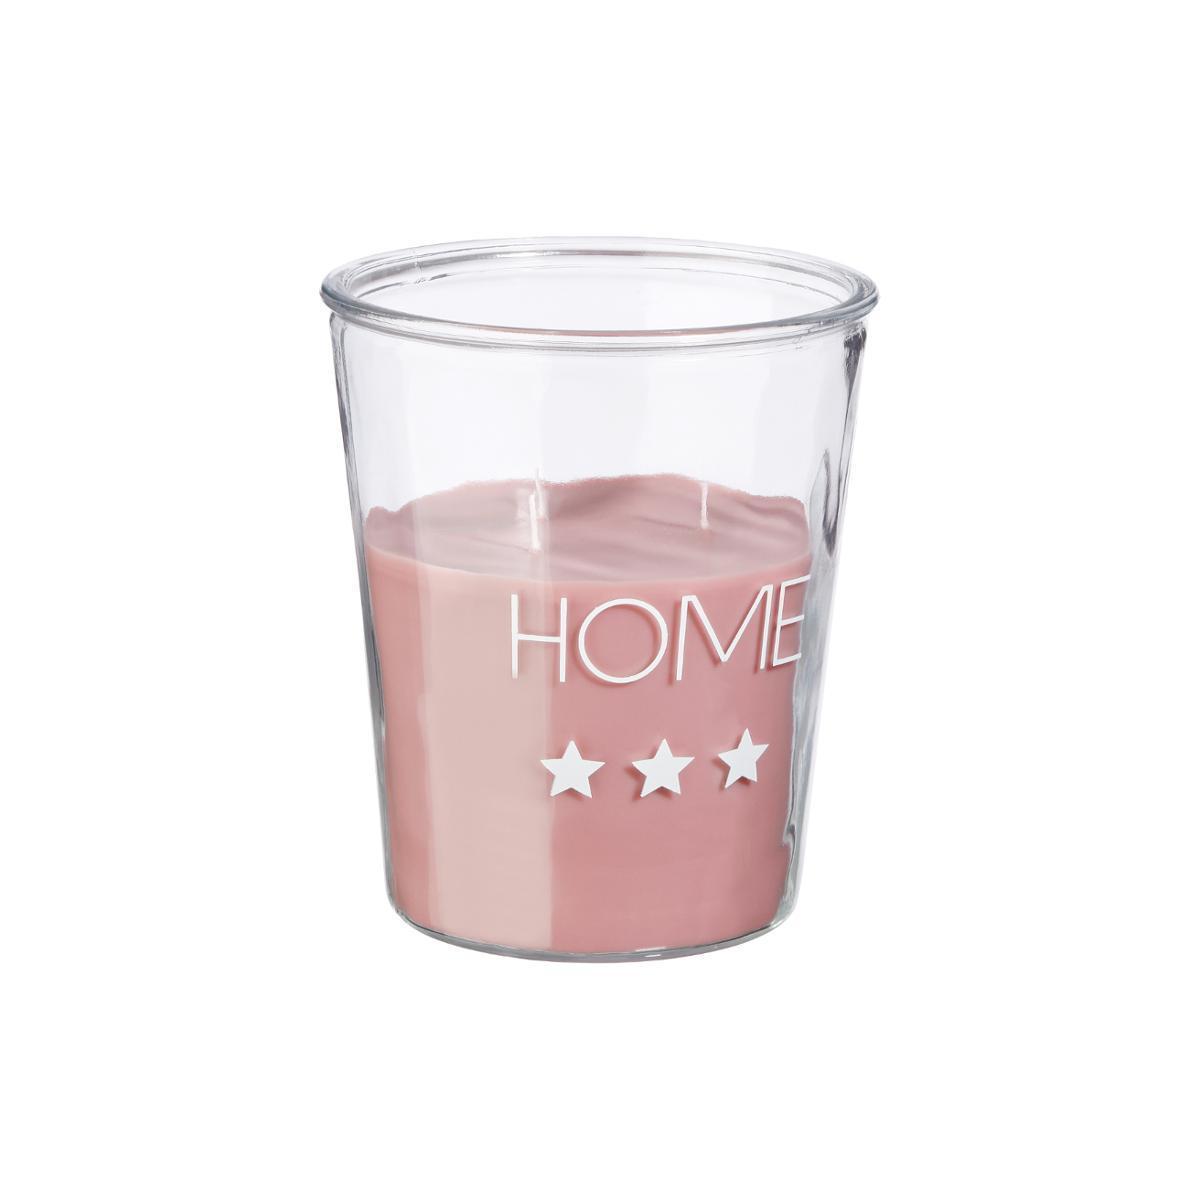 Bougie Fraise Home